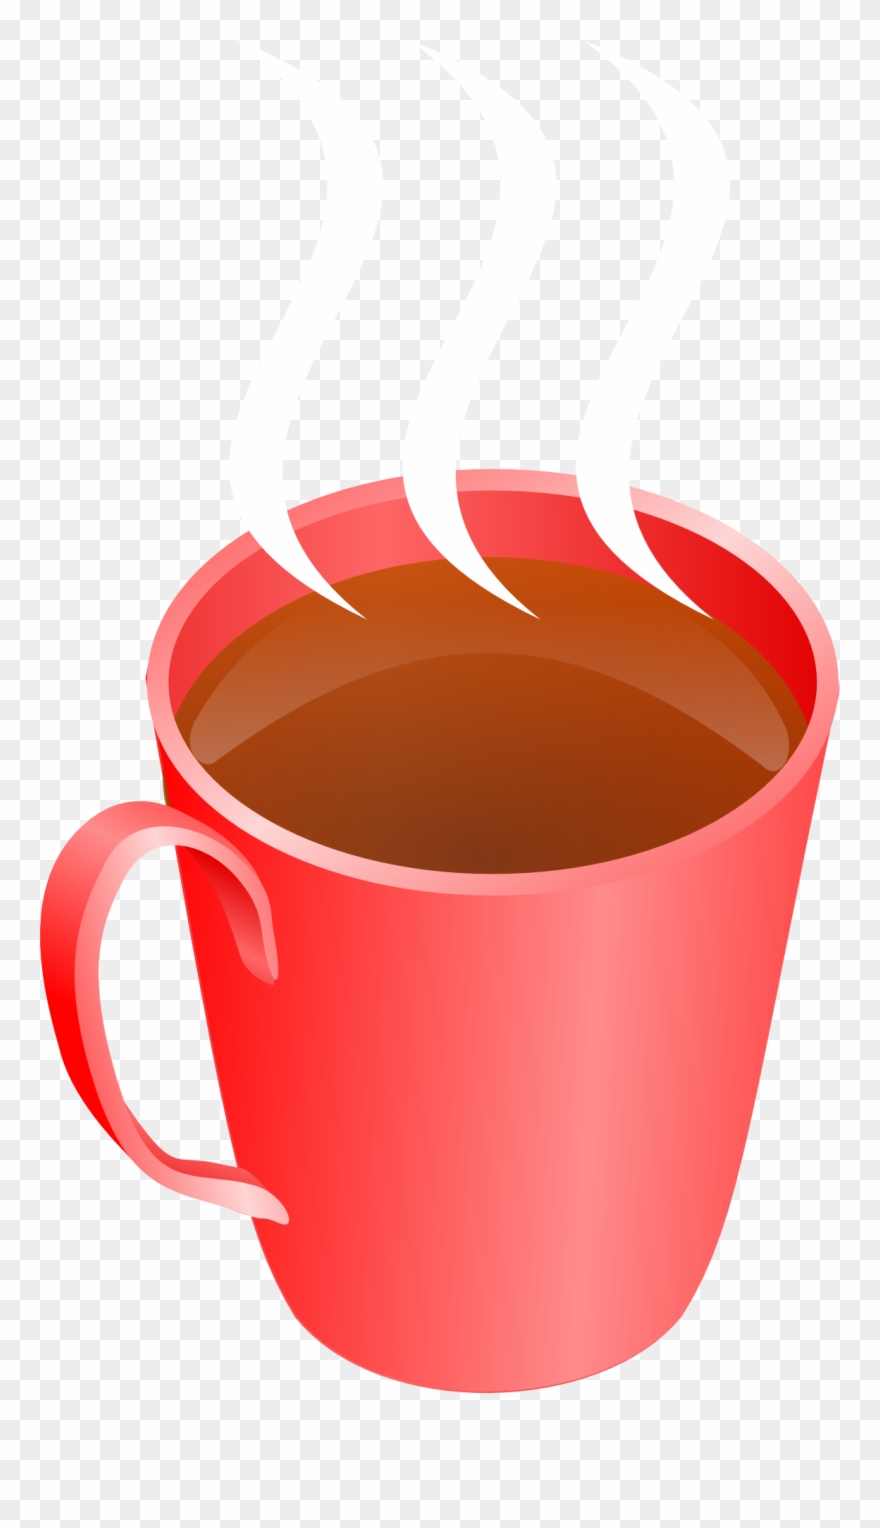 coffee clipart red